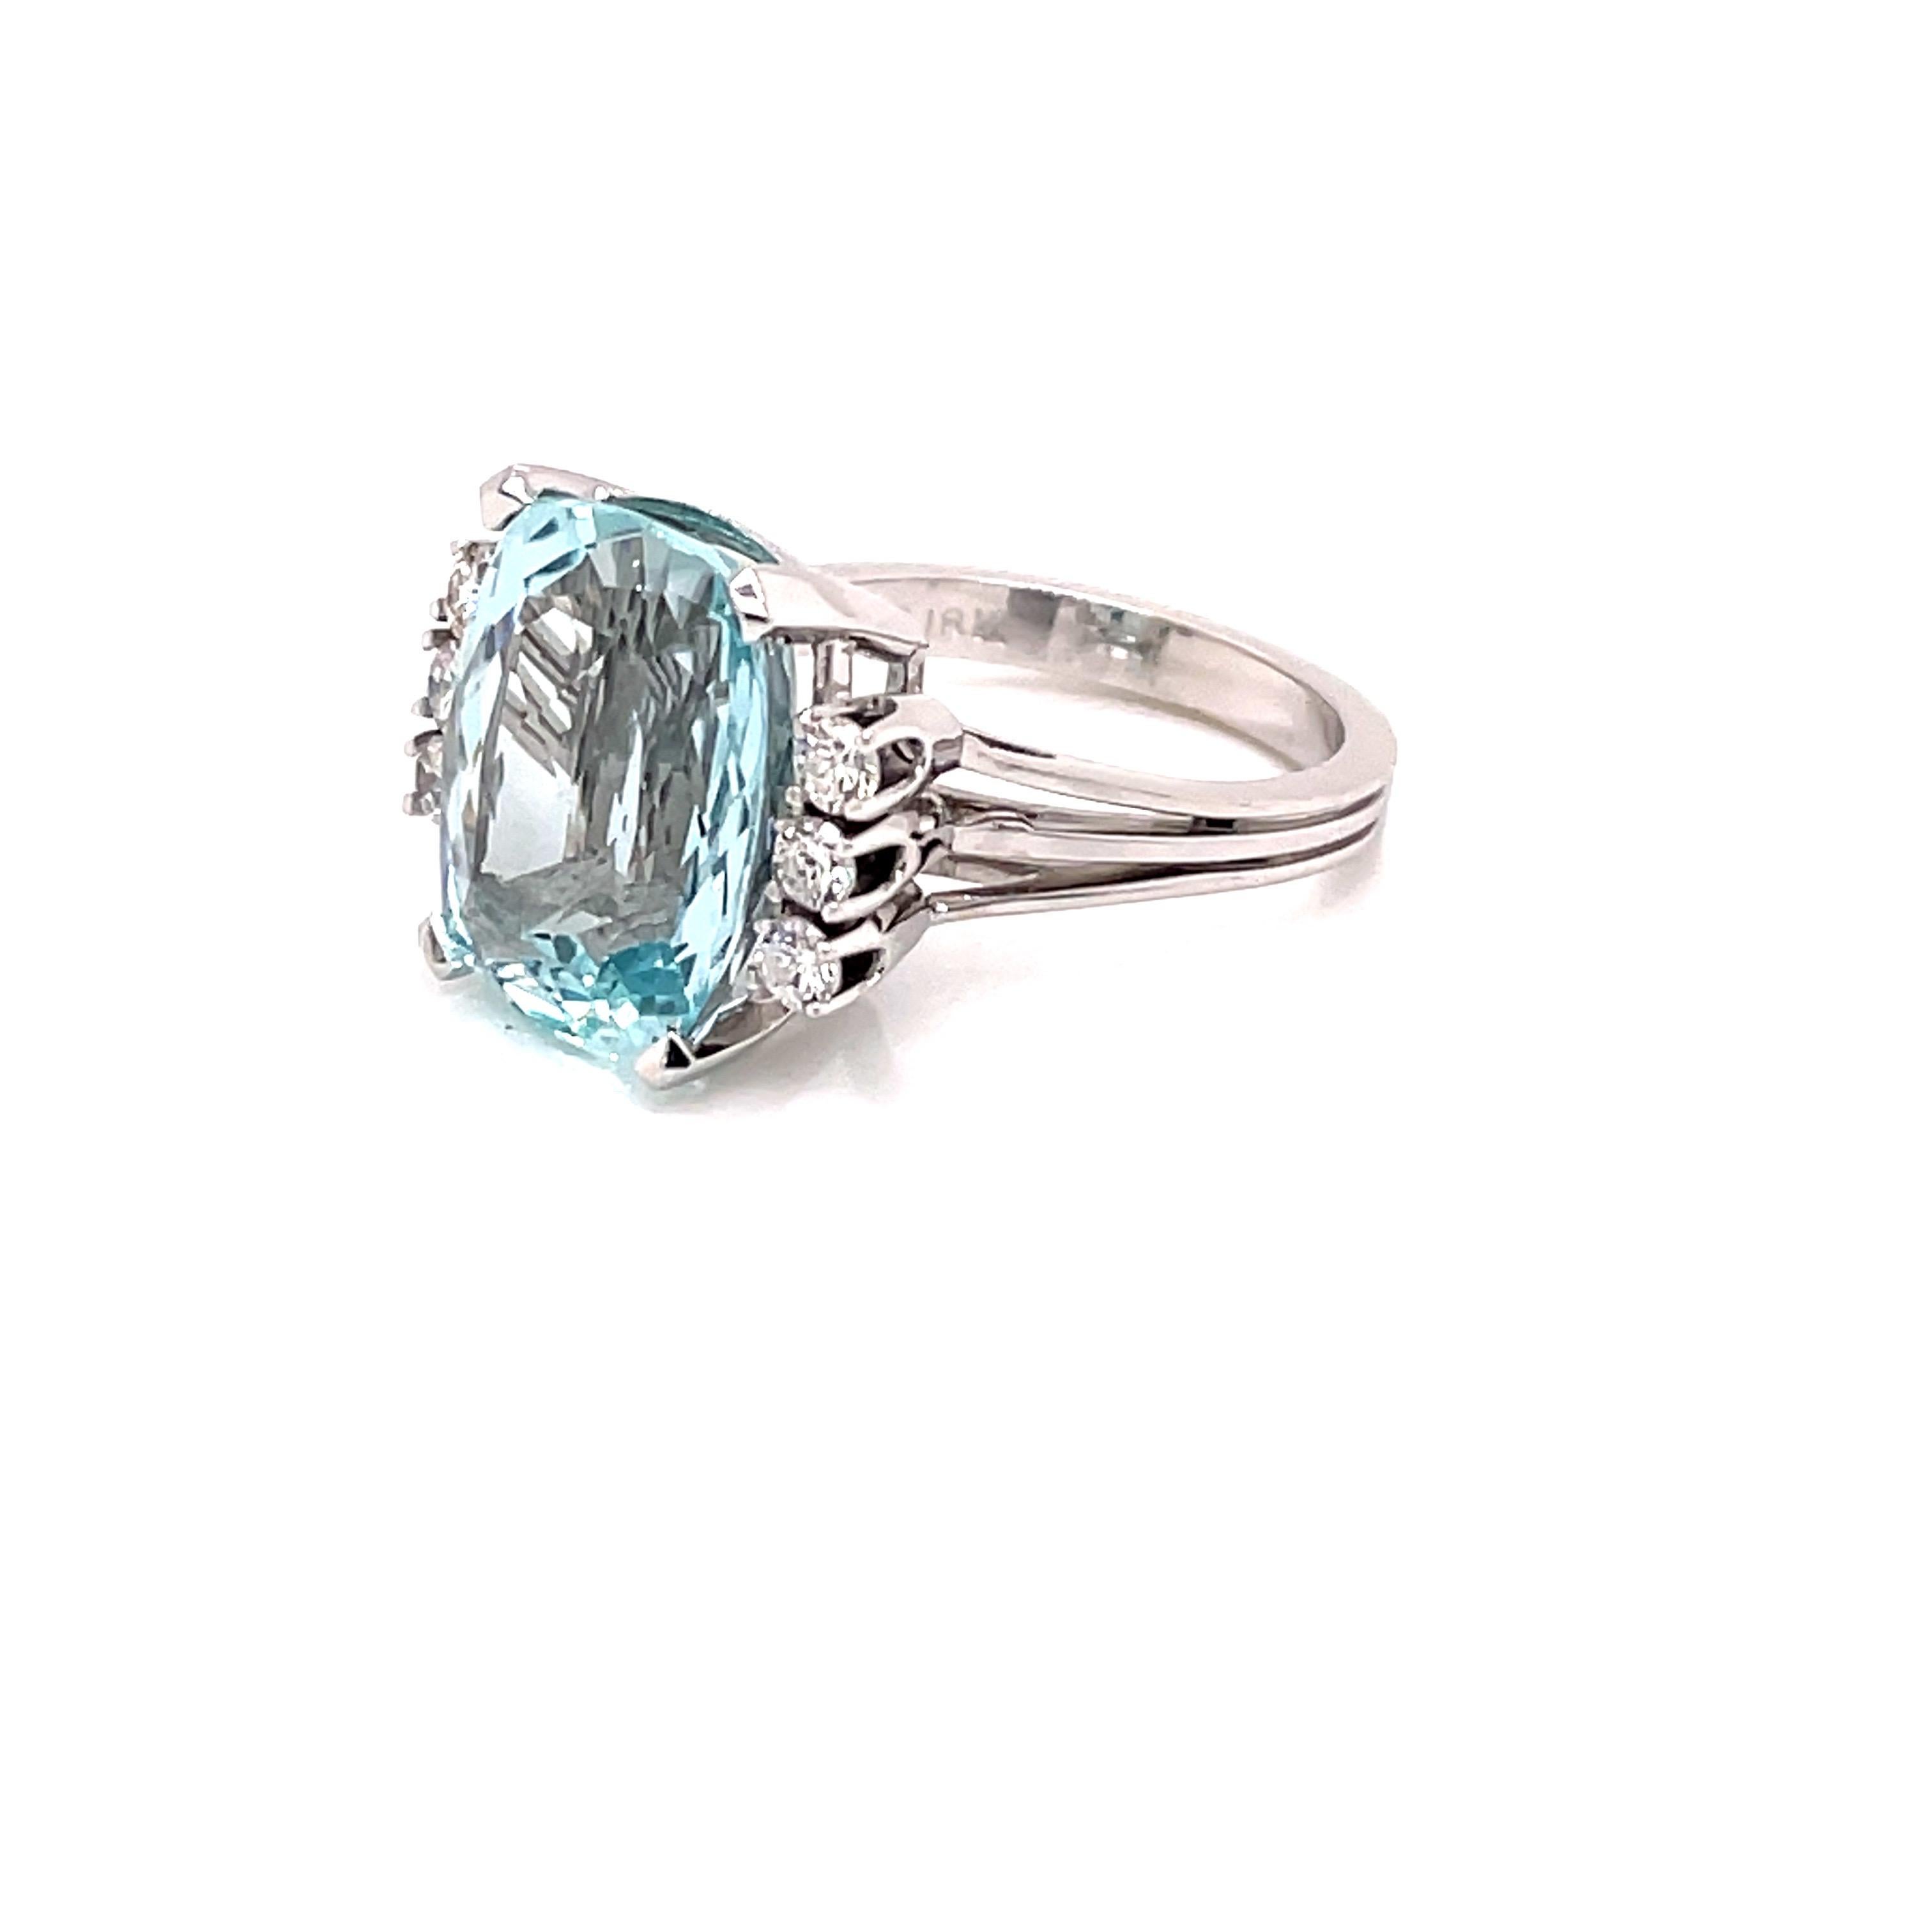 Women's Vintage 1960's 7.35ct Cushion Cut Aquamarine Ring with Diamonds For Sale